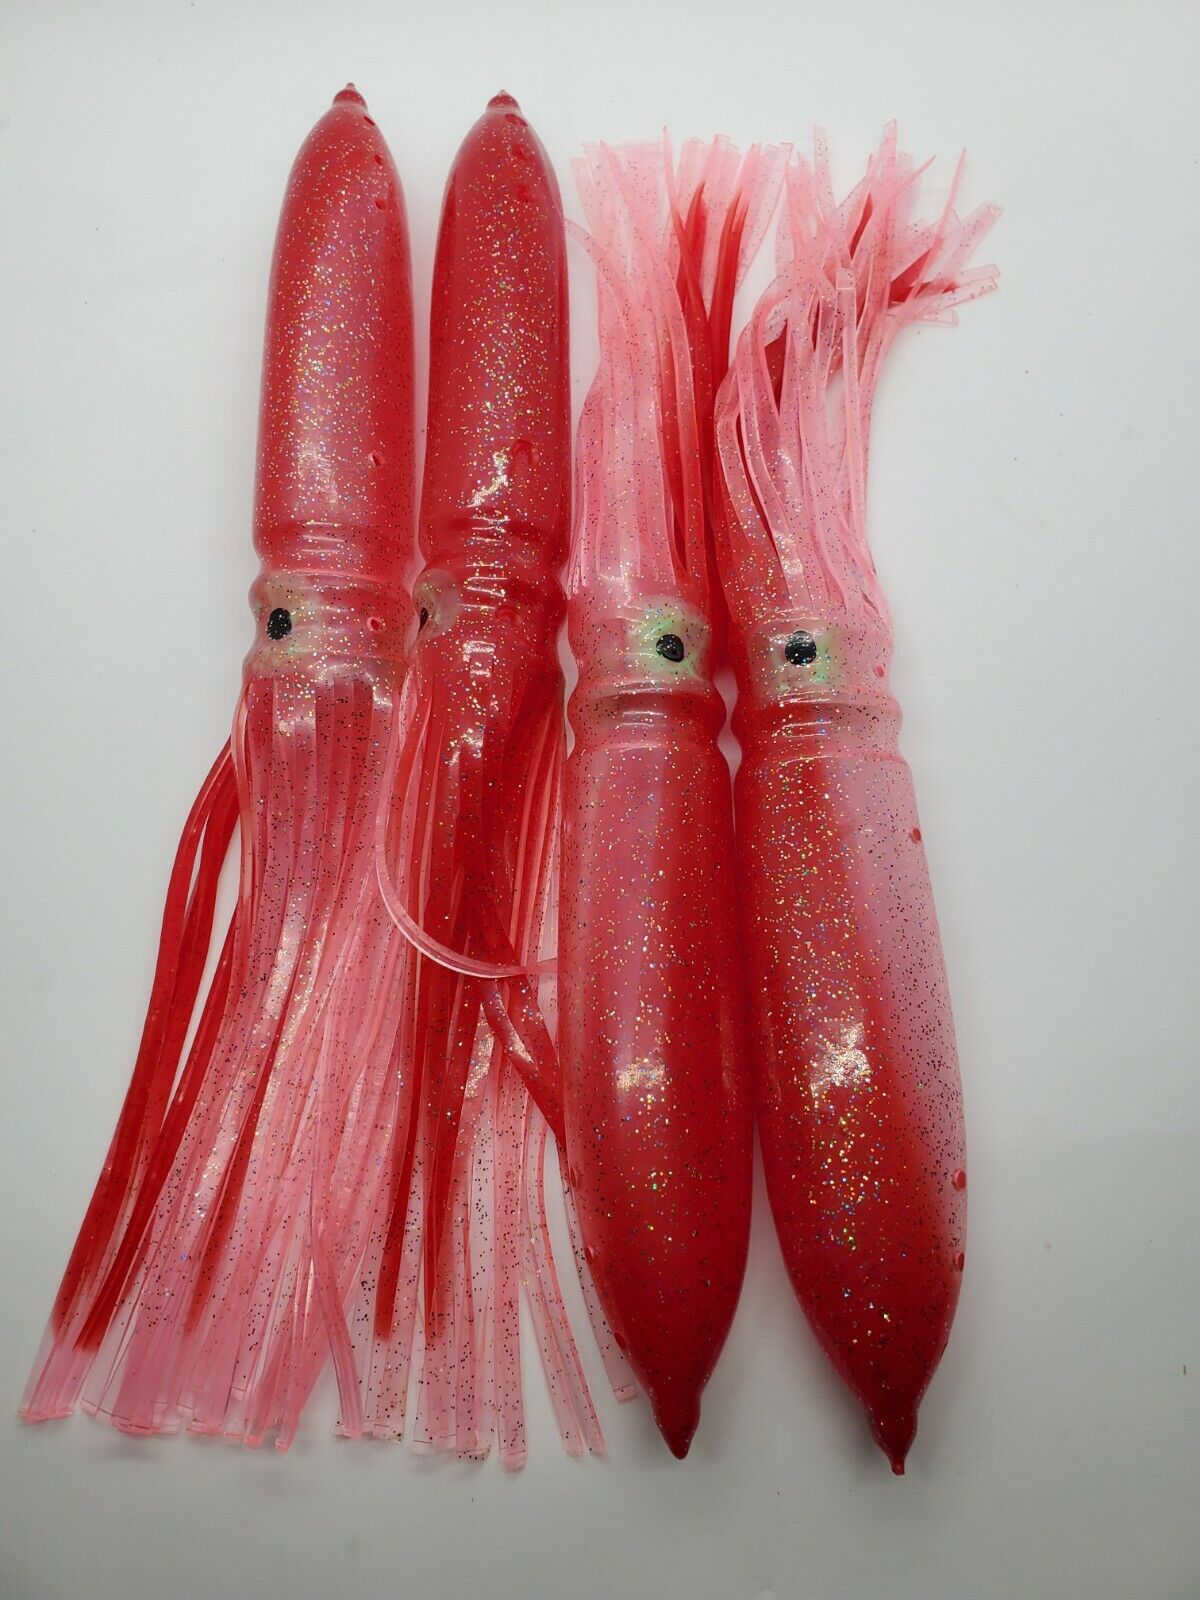 5 Pack Fishing Bulb Squids Skirt Lures Hoochie Offshore Trolling Lure